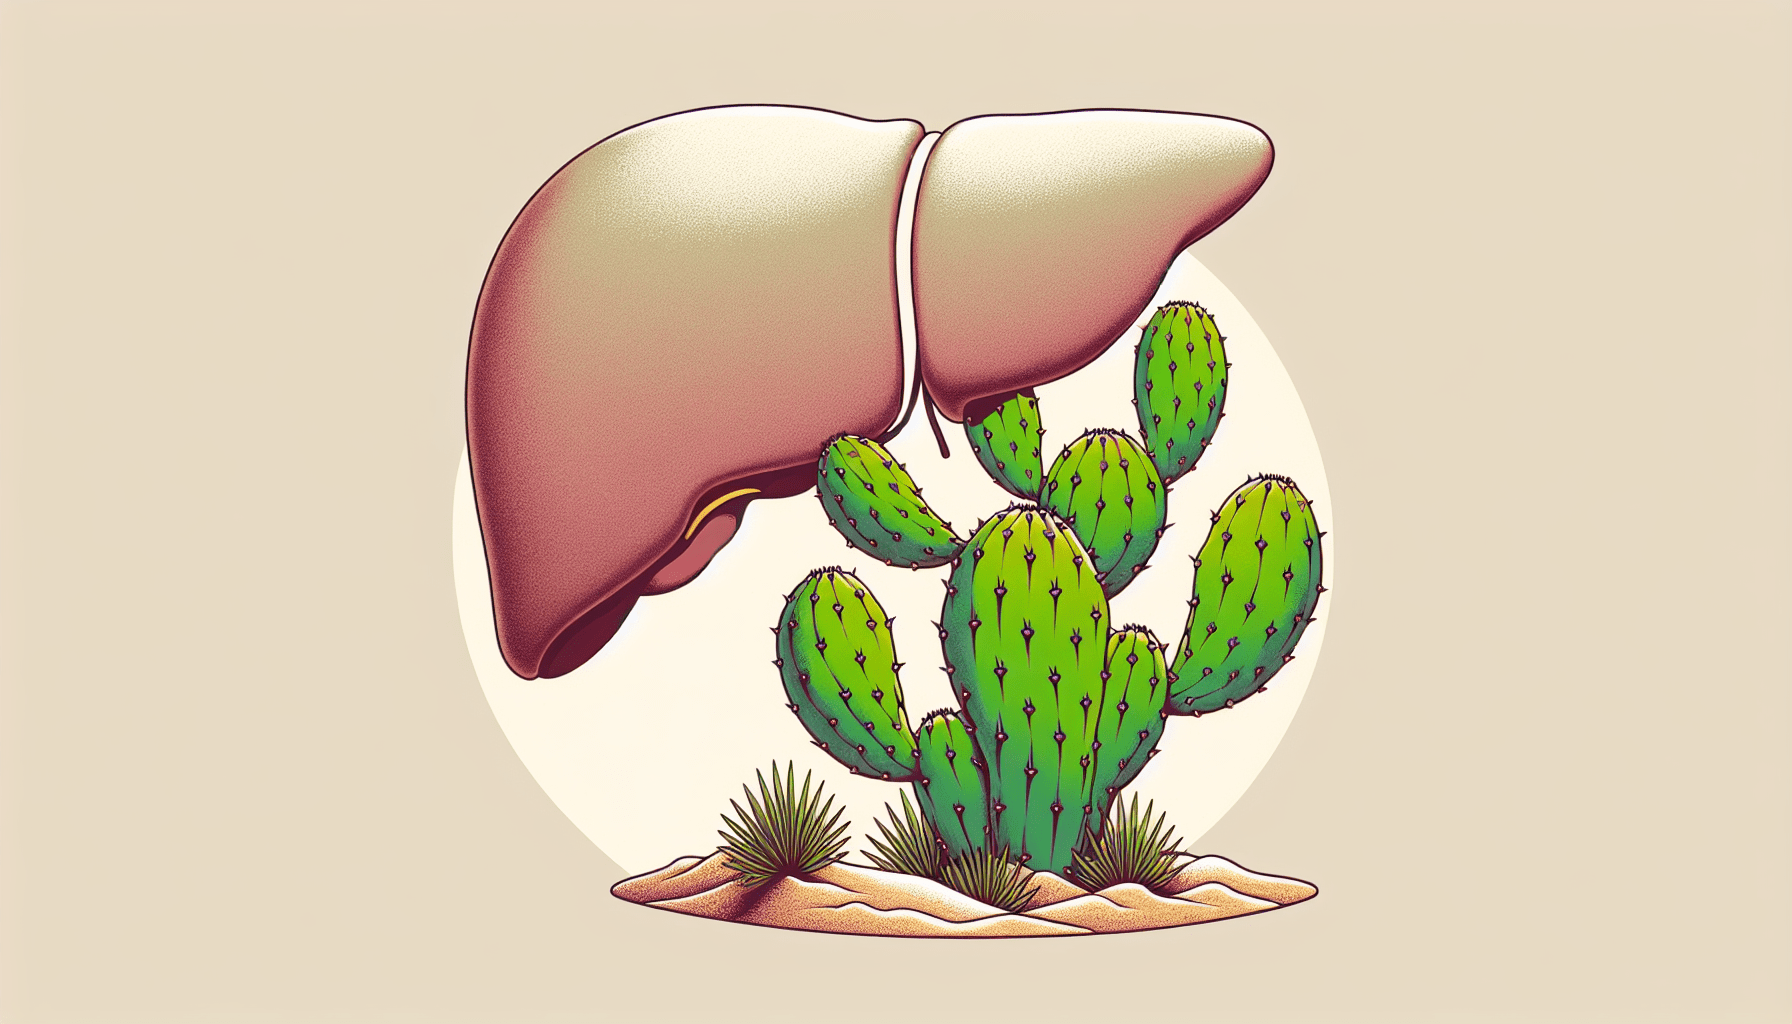 Is There Scientific Support For Nopal’s Effects On Liver Function?